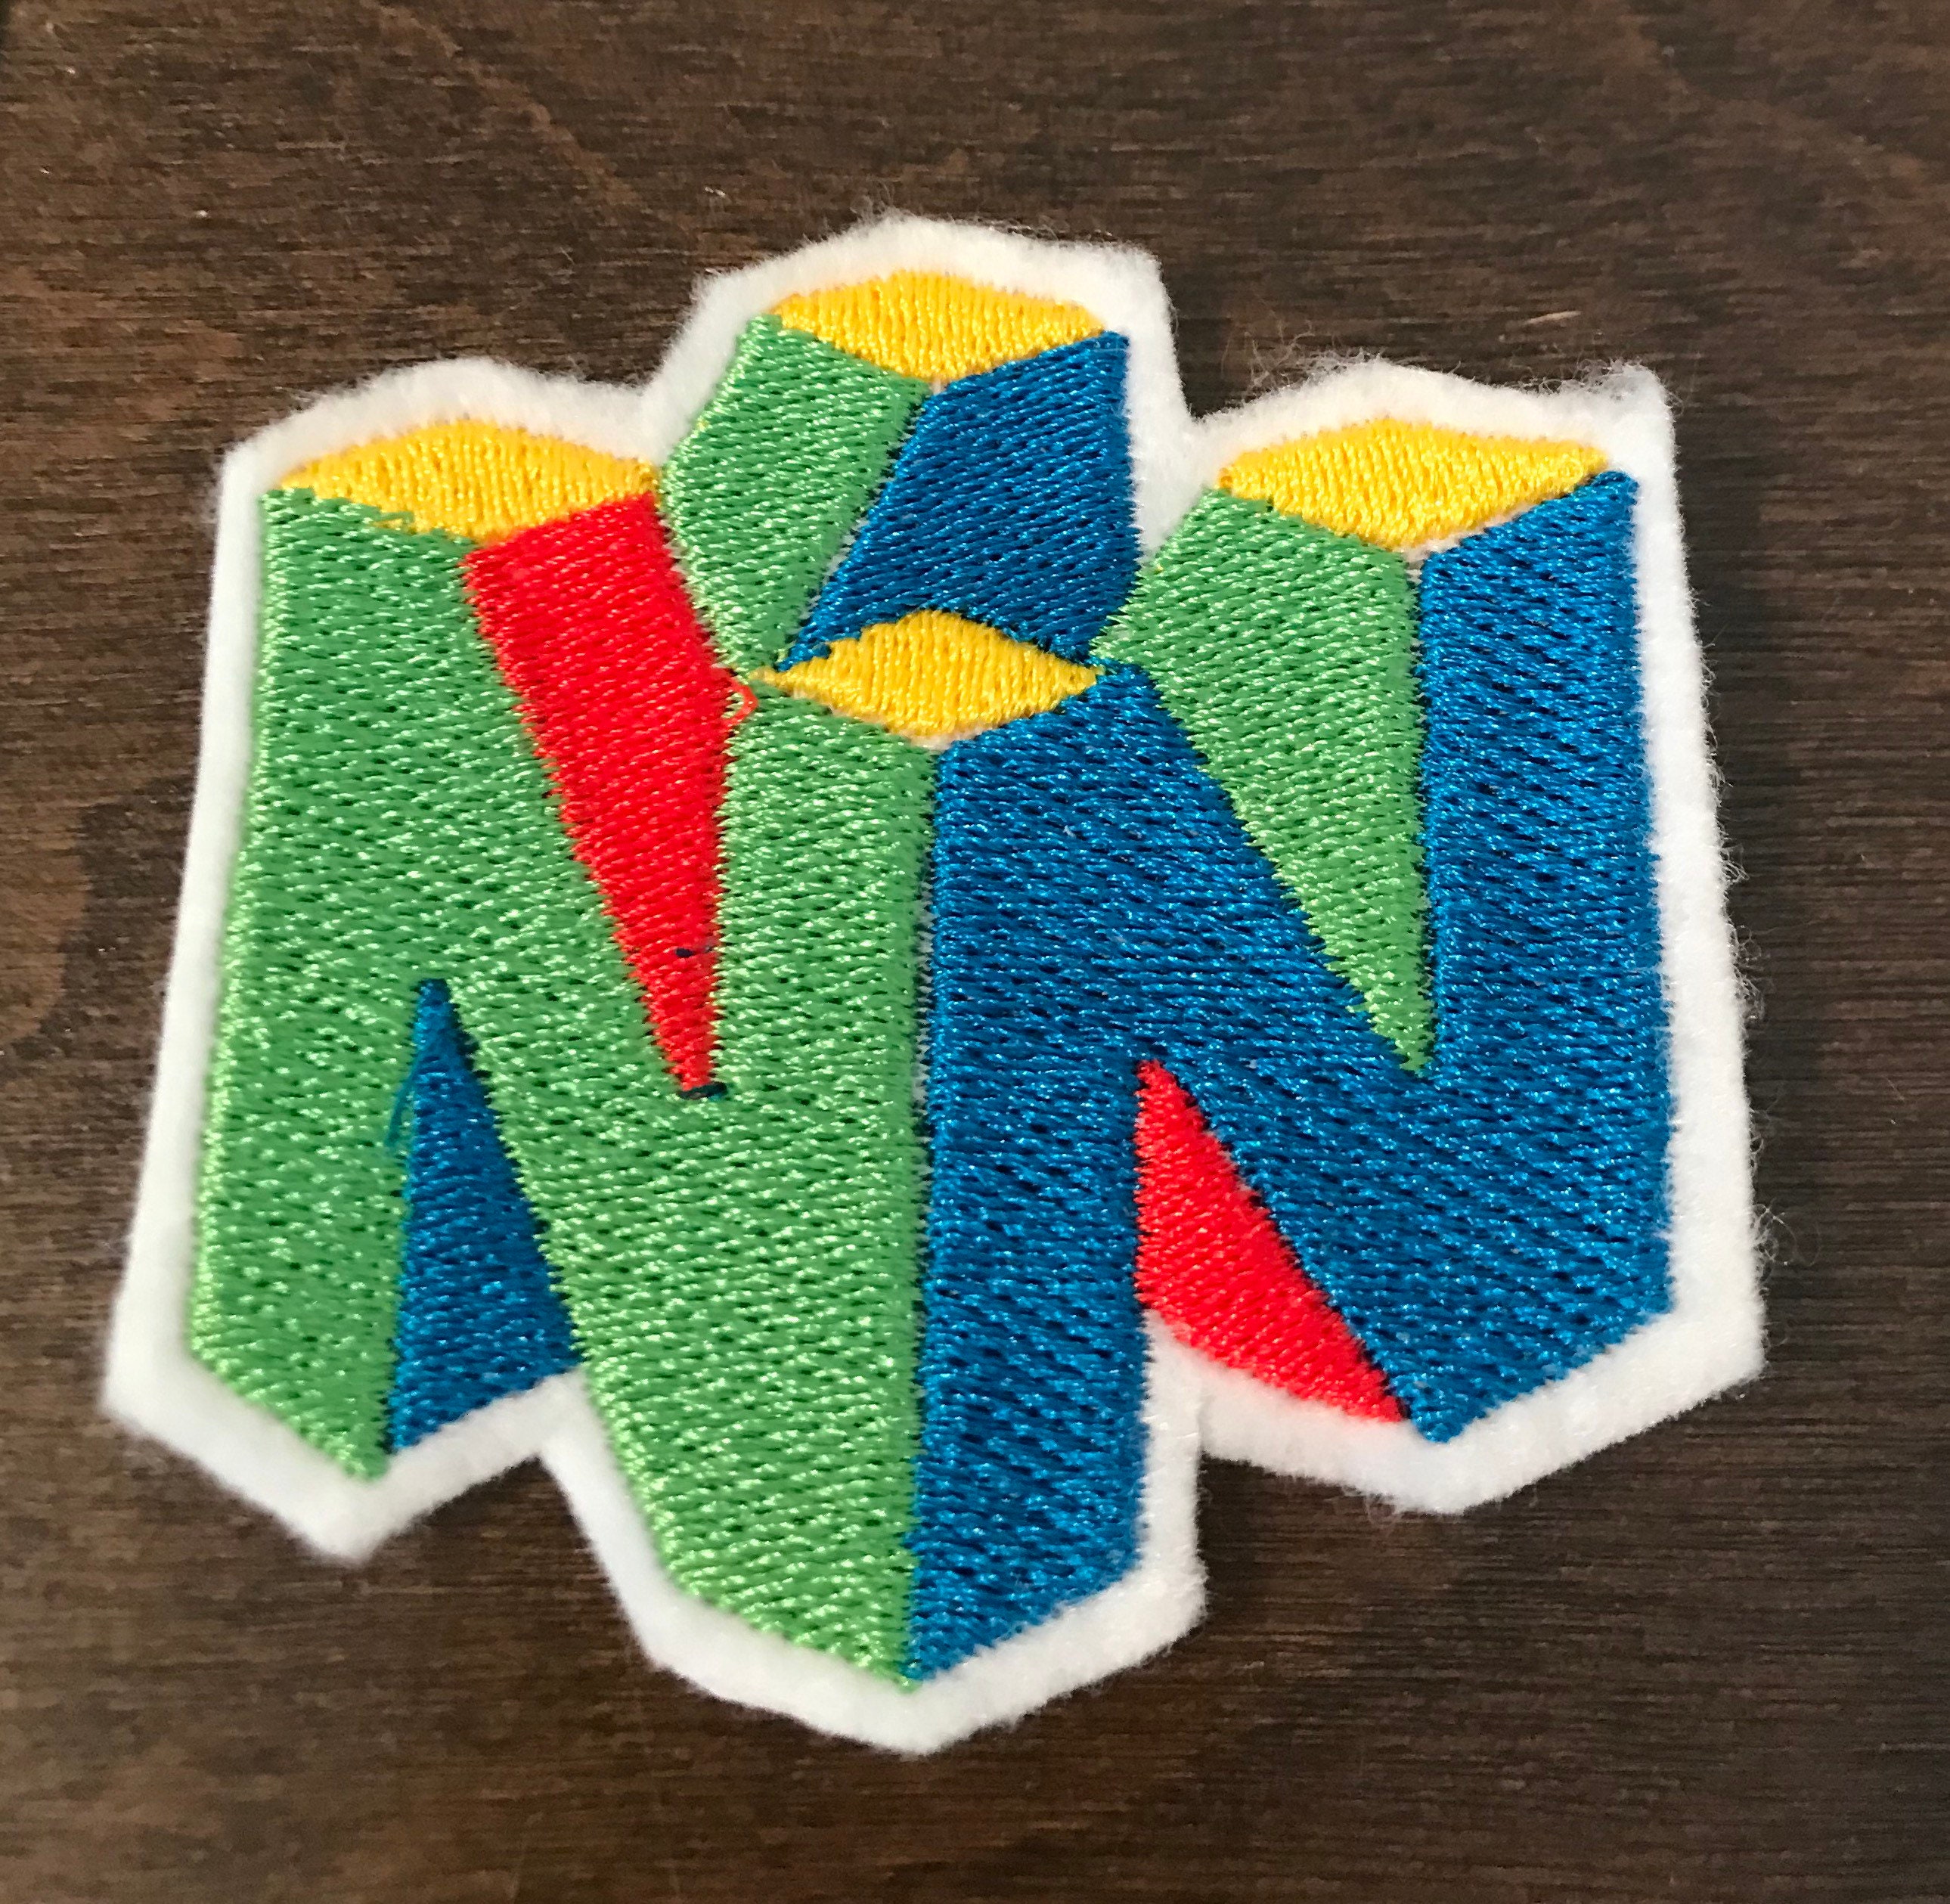 N64 Iron-on Nintendo Patch From Nintendo - Etsy